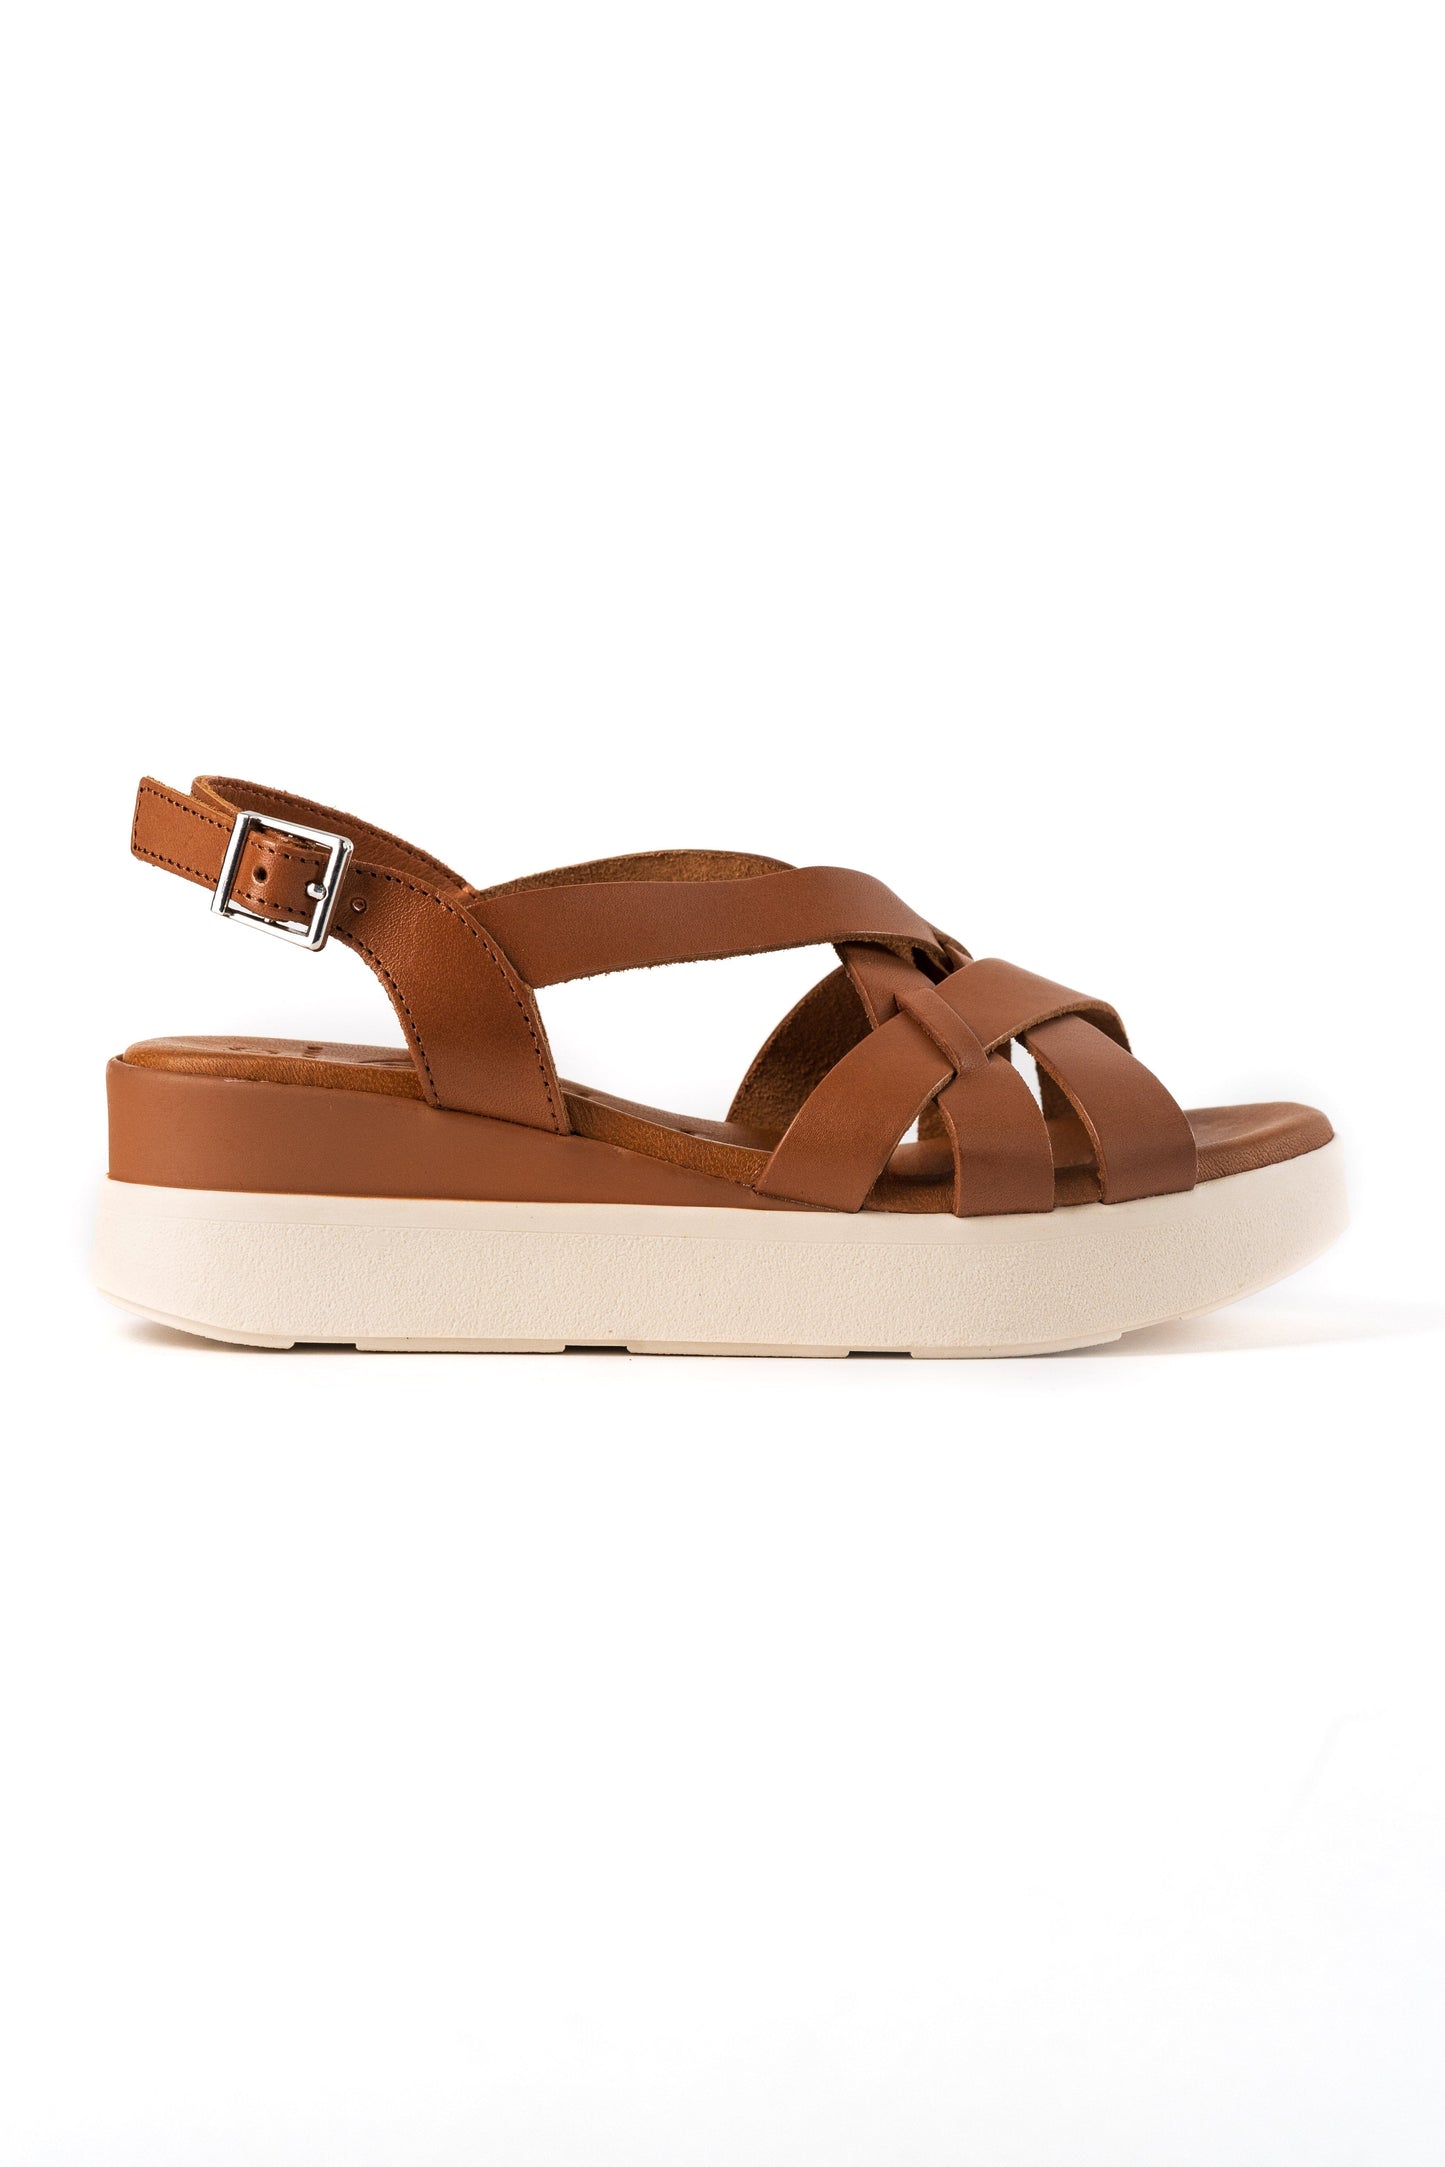 5188 Spanish leather crossed strappy sandals/wedge in Tan and Navy sandals Sam Star Shoes Tan 37/4 